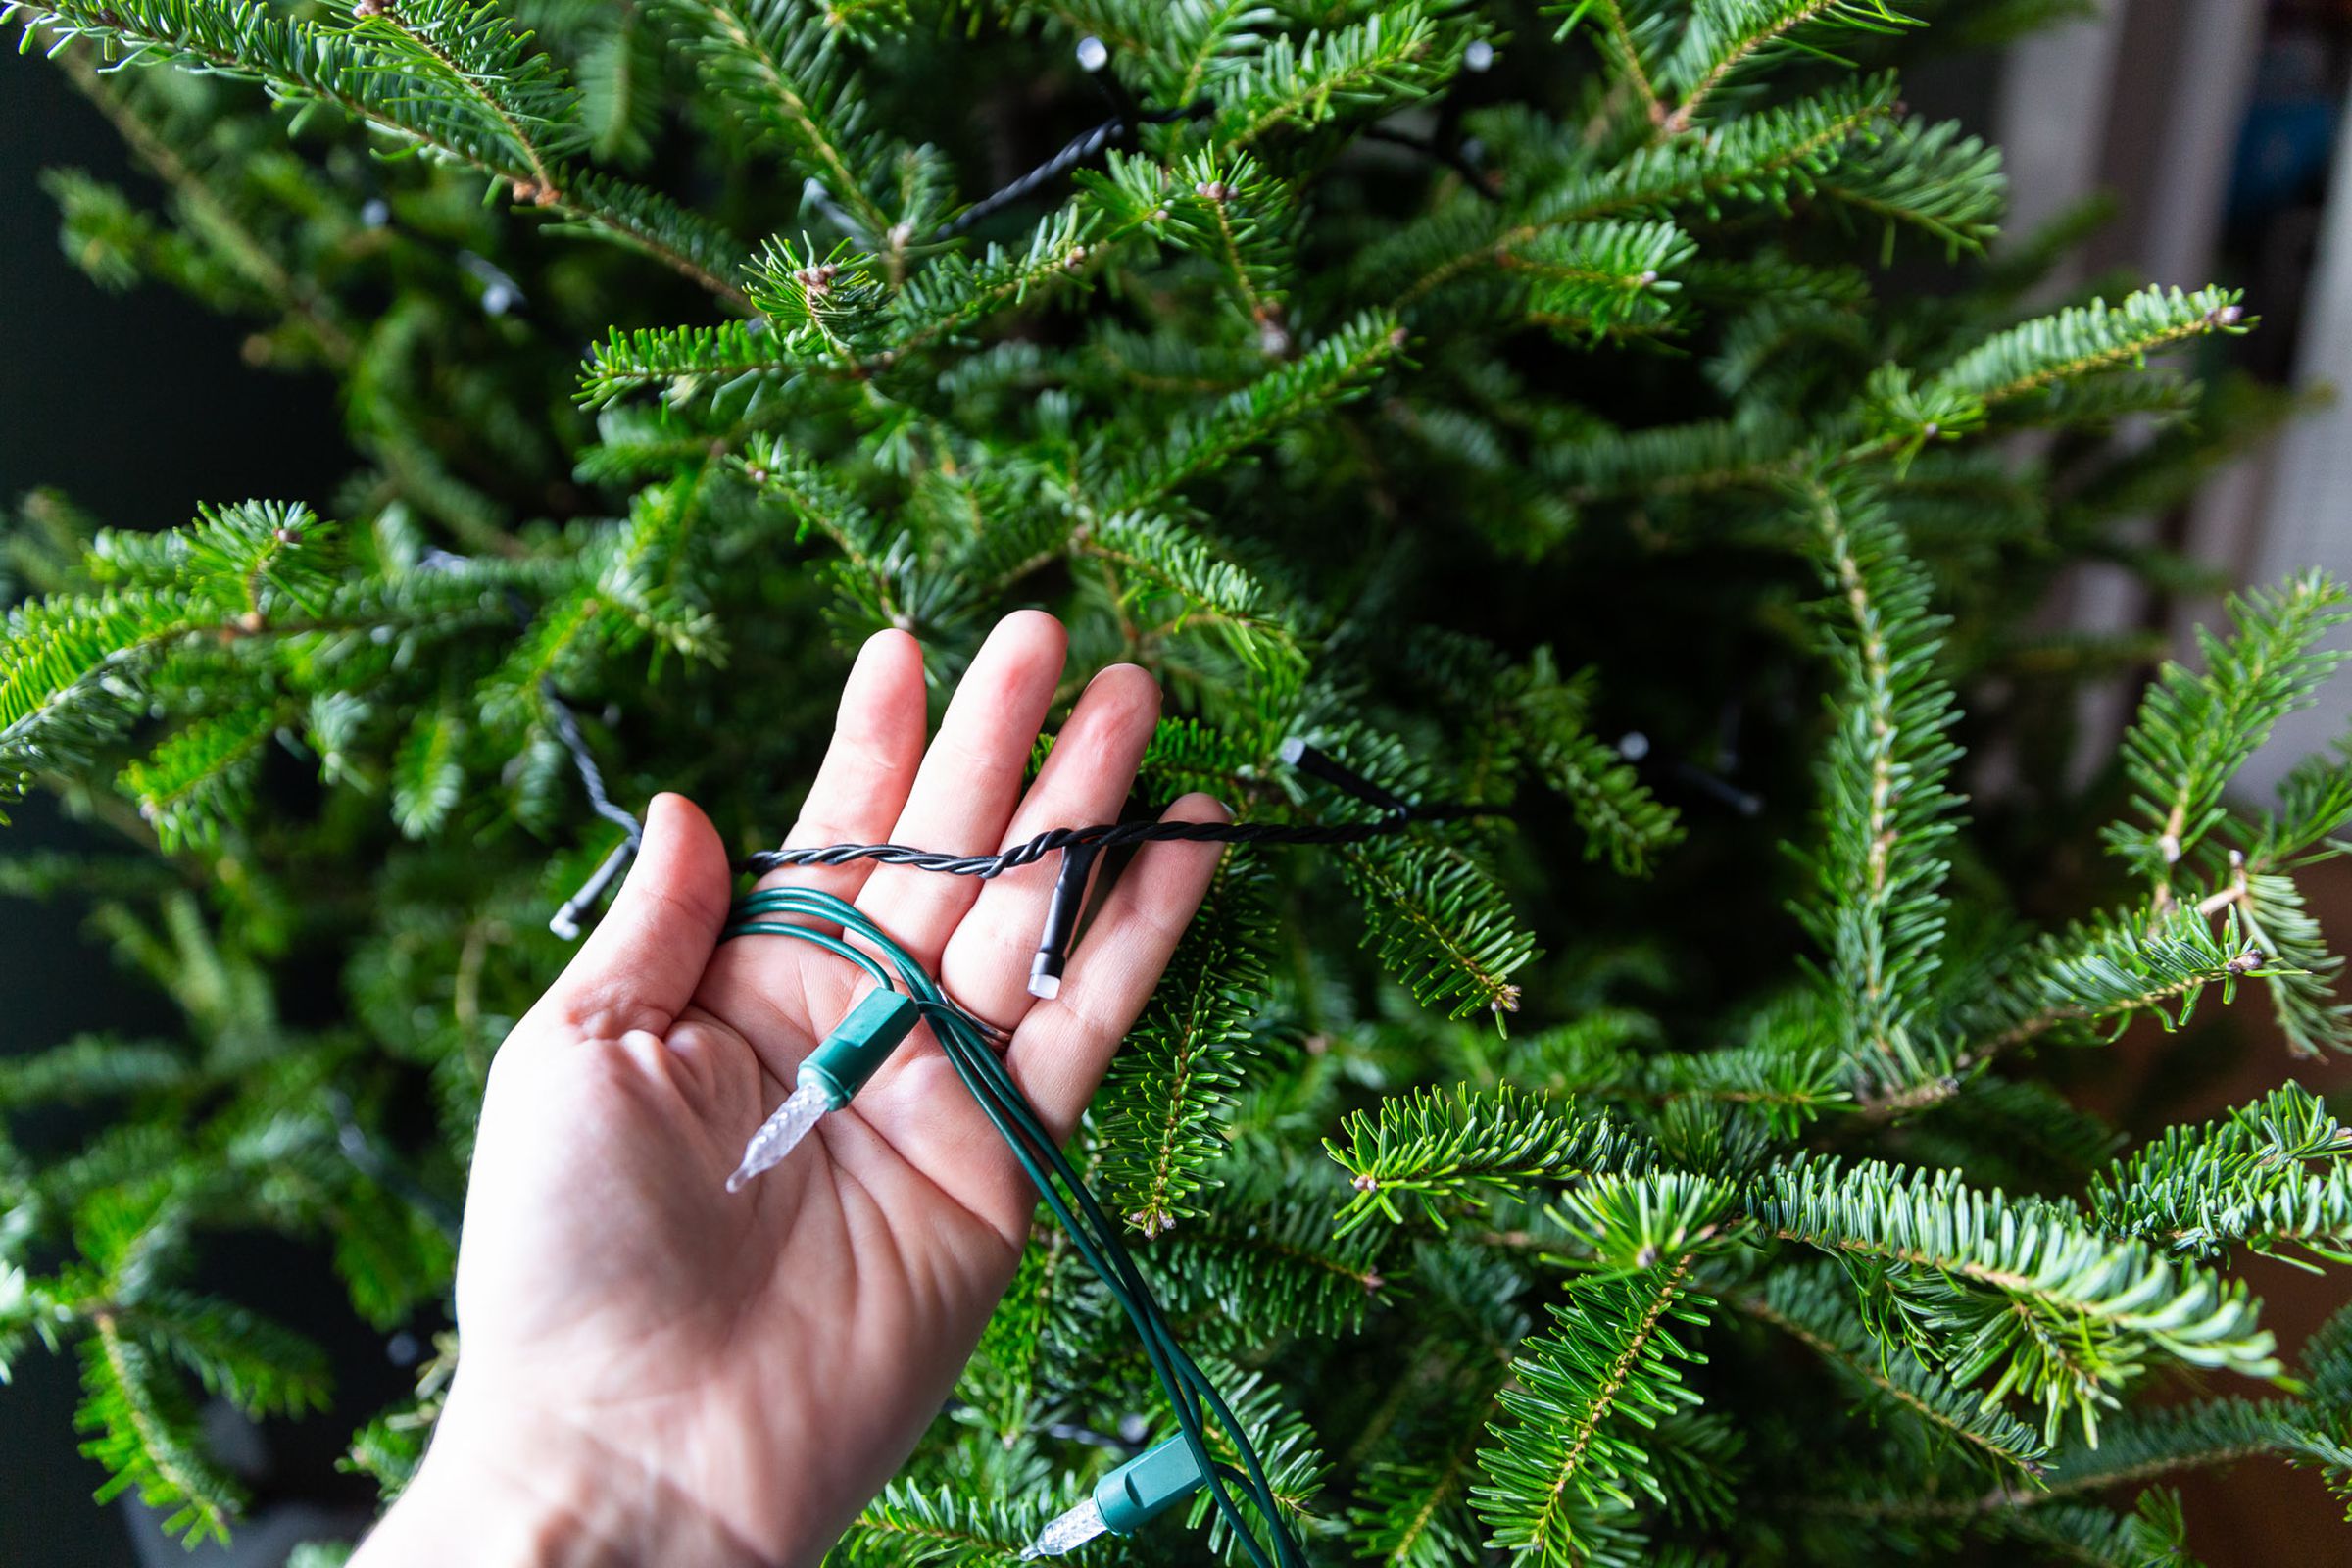 A hand in front of a Christmas tree, holding a standard strand of string lights and a much slimmer strand of Hue string lights.